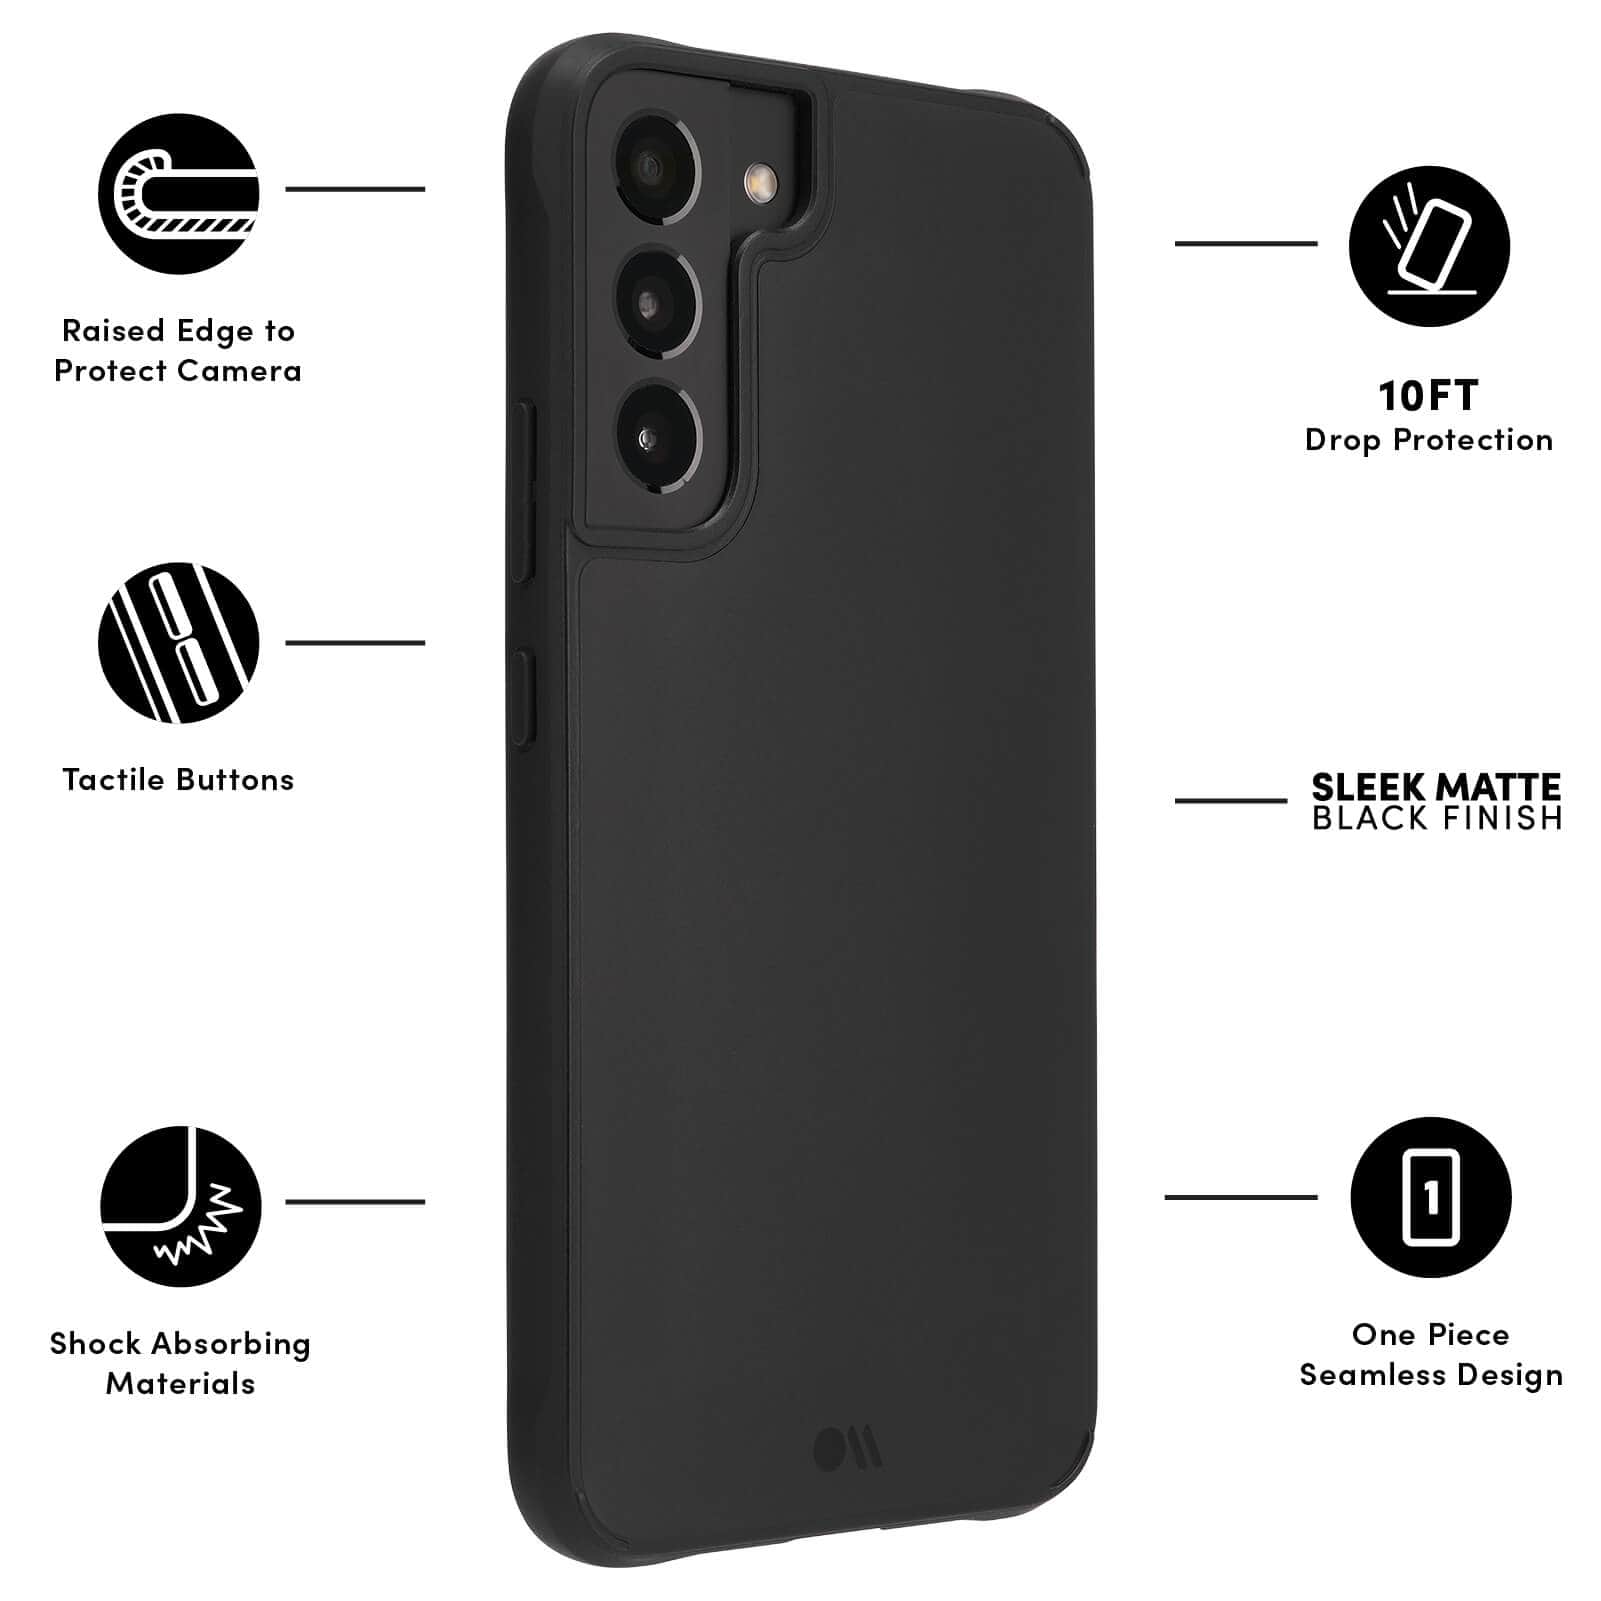 FEATURES: RAISED EDGE TO PROTECT CAMERA, TACTILE BUTTONS, SHOCK ABSORBING MATERIALS. 10FT DROP PROTECTION, SLEEK MATTE BLACK FINISH, ONE PIECE SEAMLESS DESIGN. COLOR::BLACK